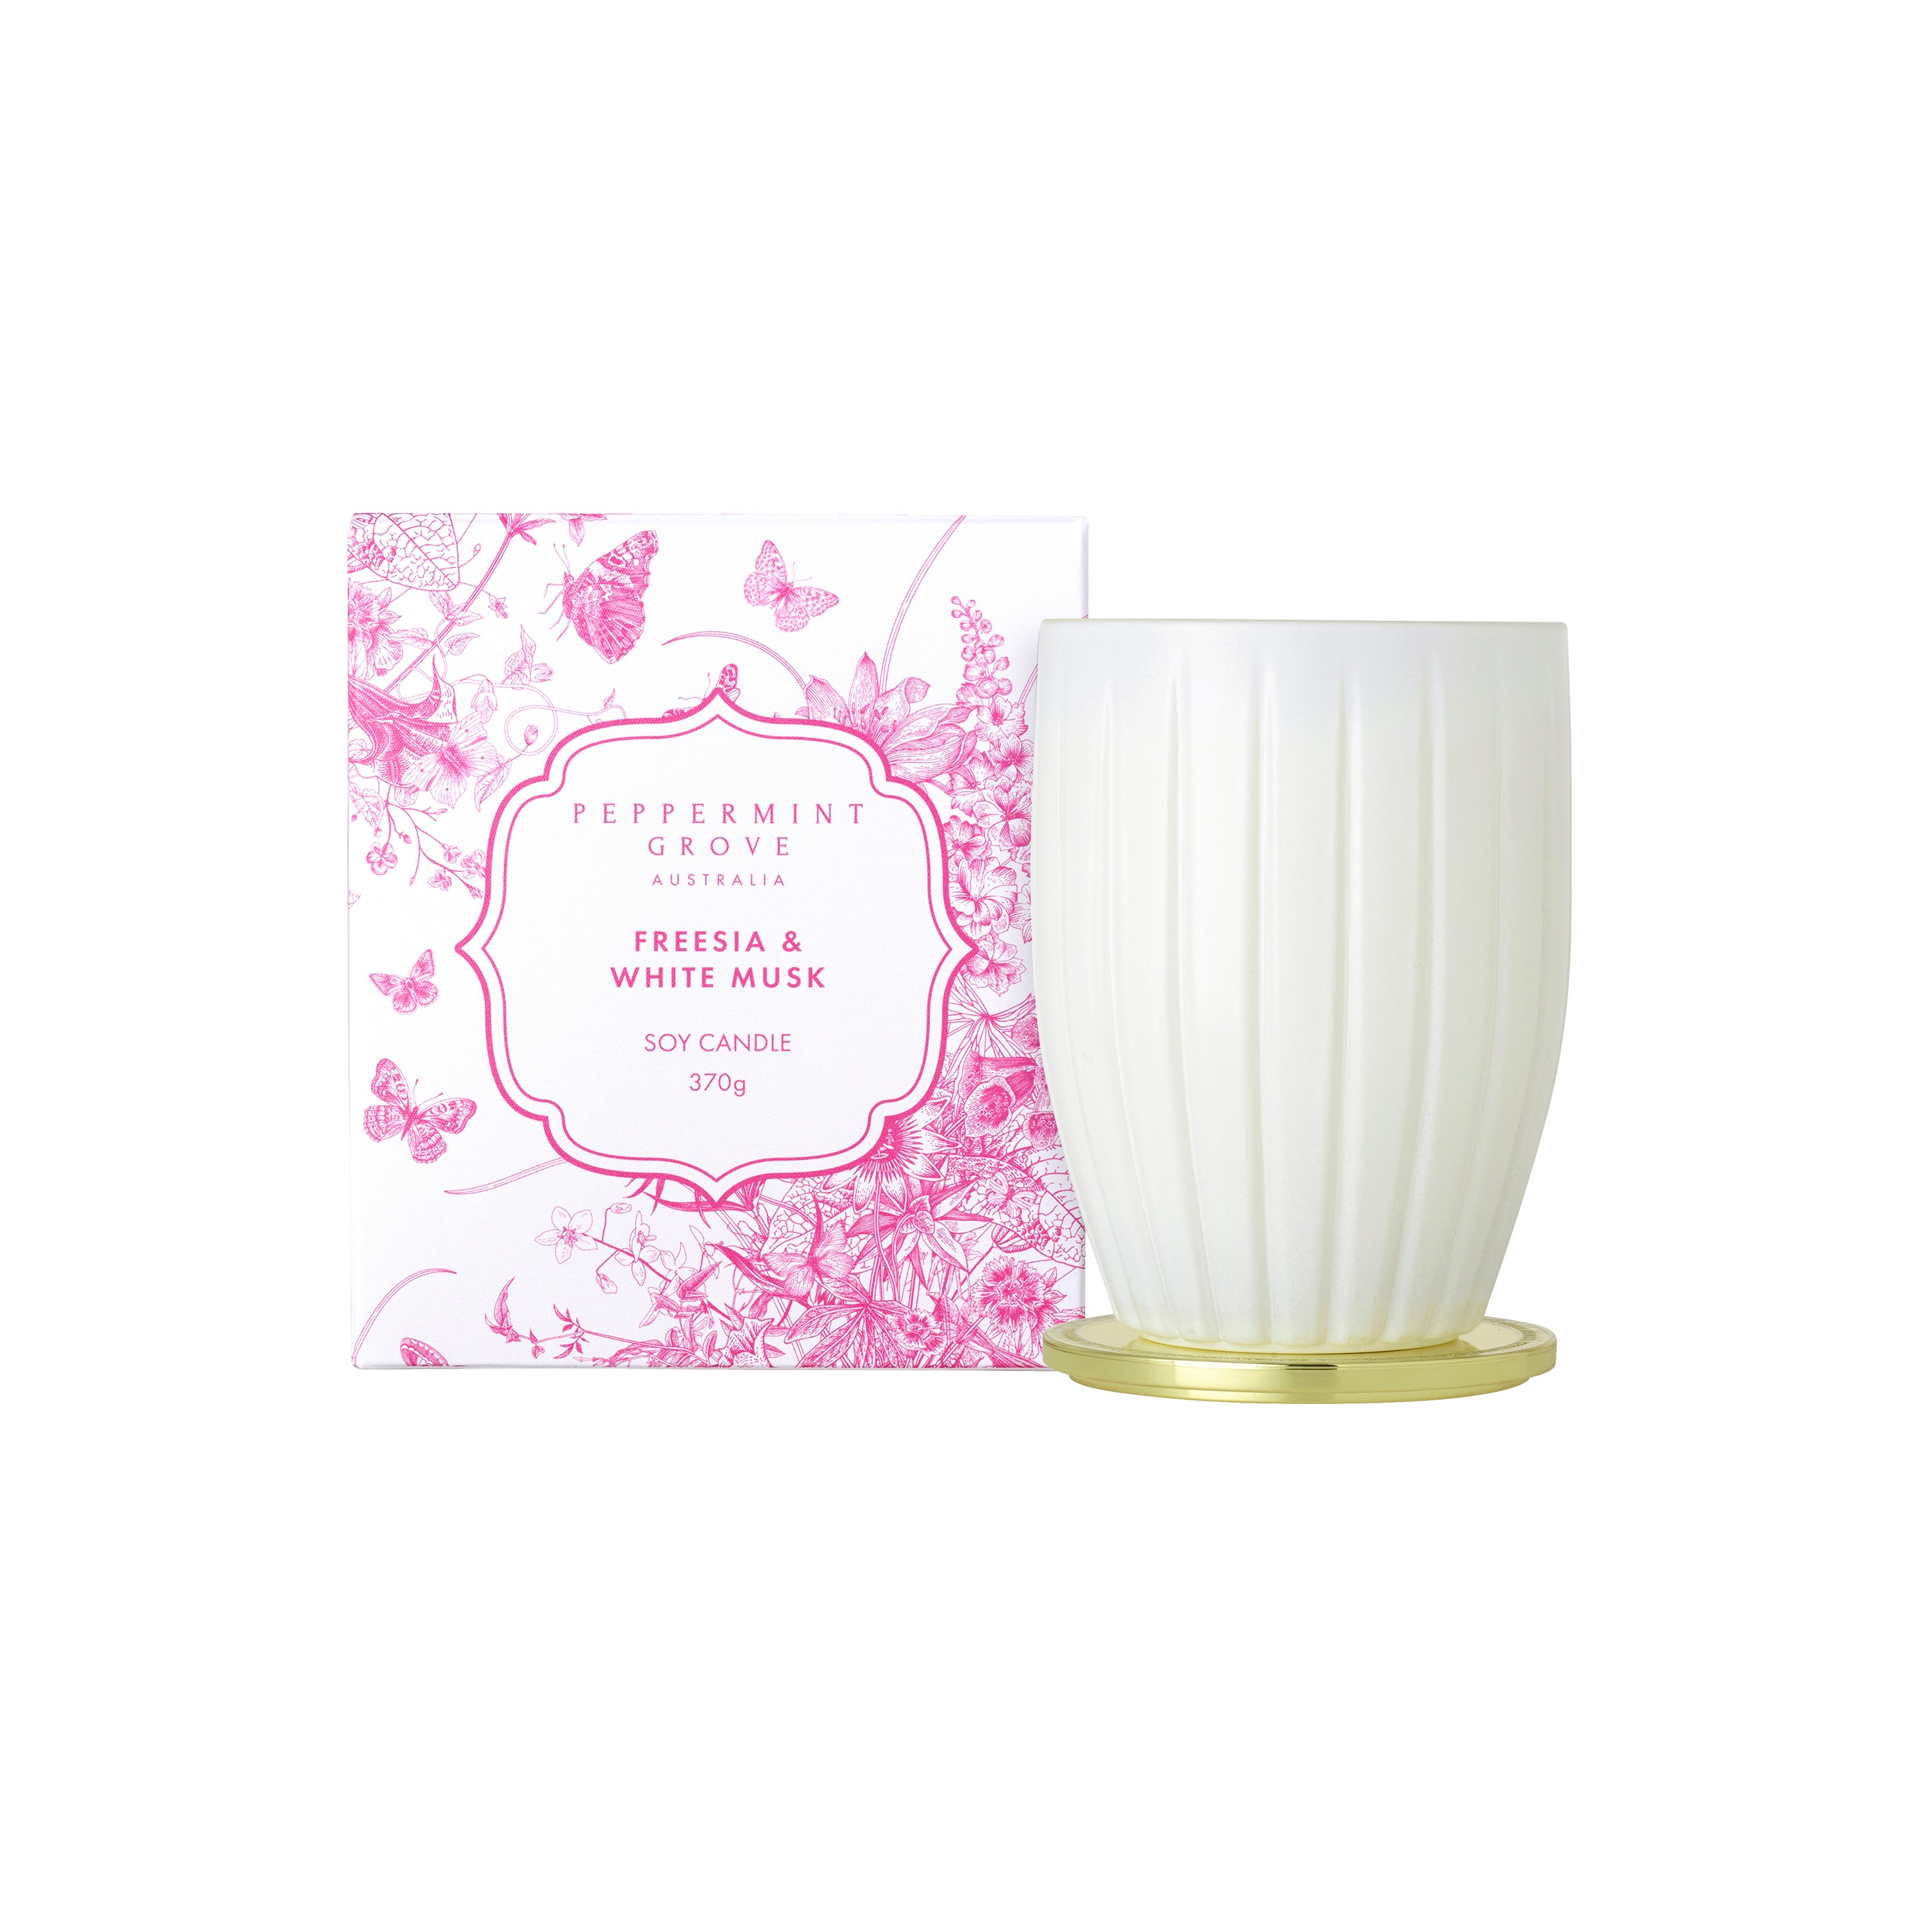 Peppermint Grove Freesia & White Musk Soy Candle 370g (Limited Edition)